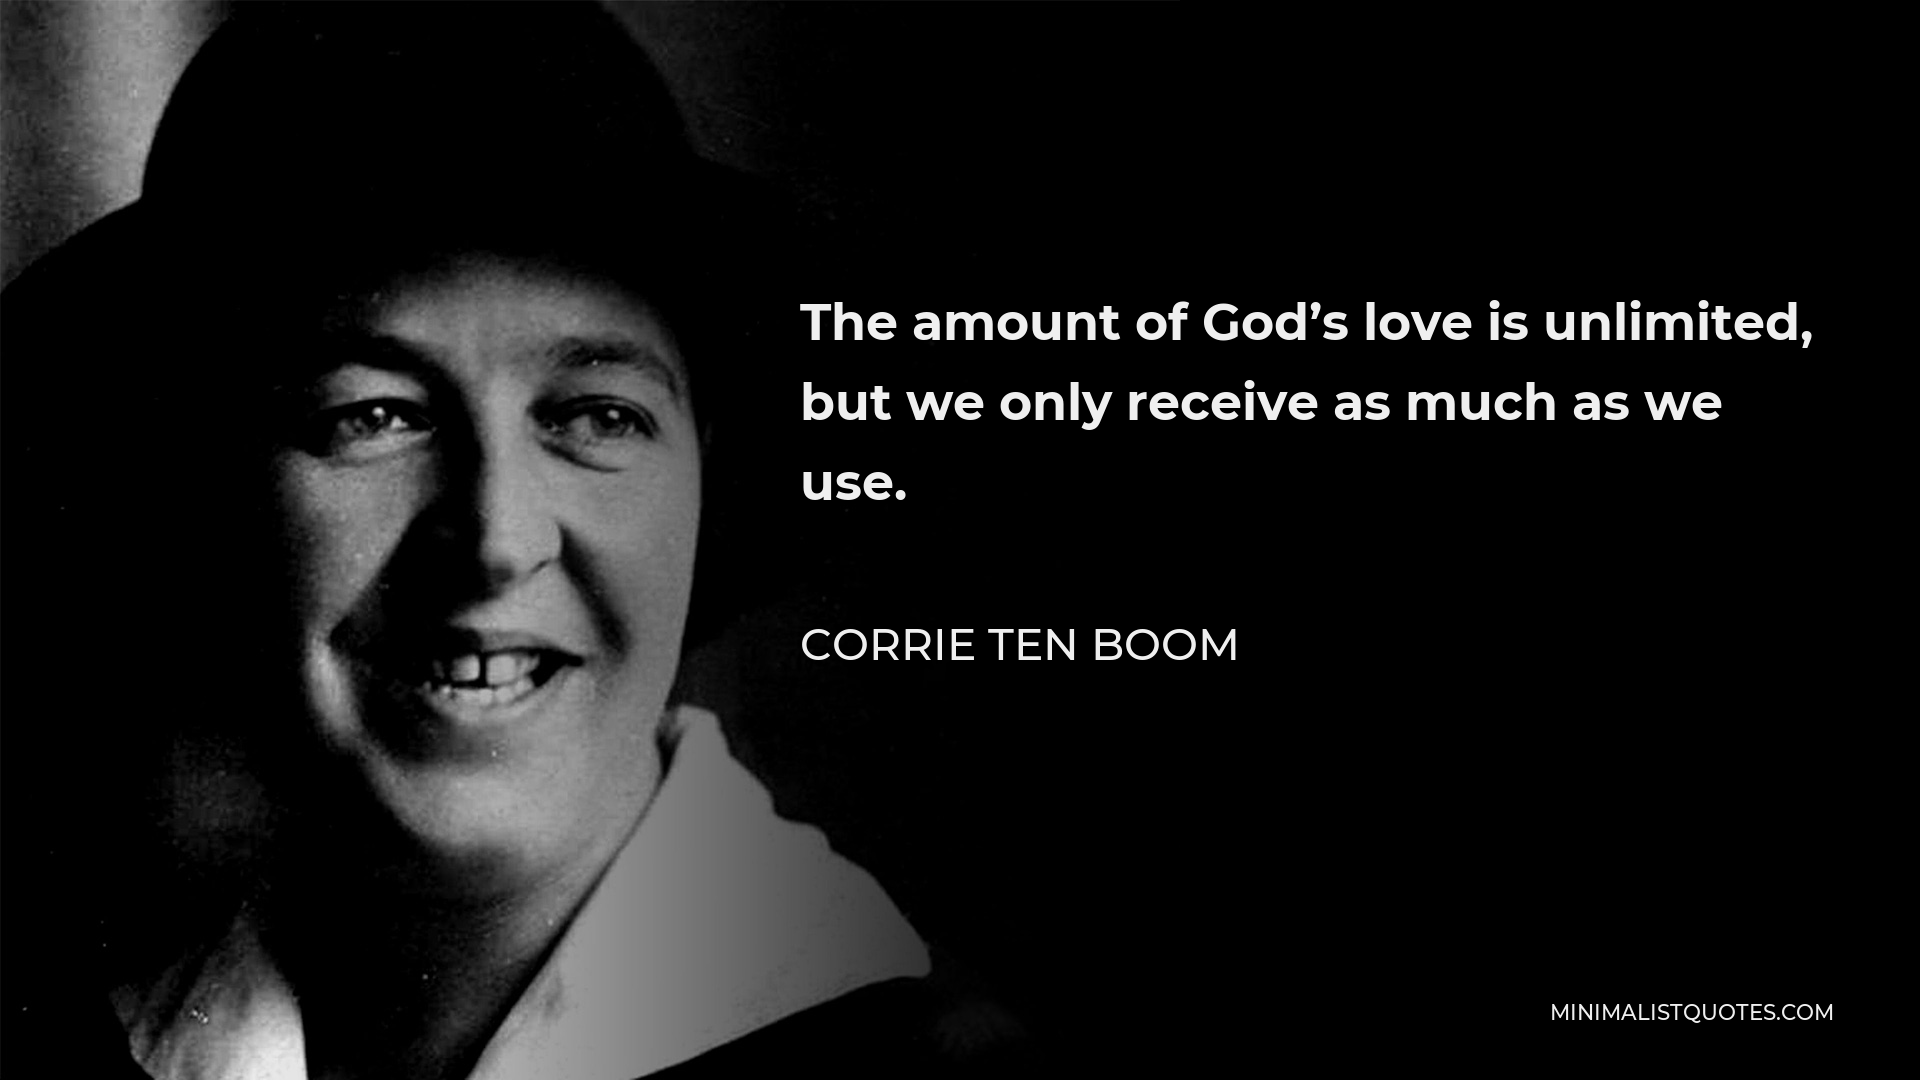 Corrie ten Boom Quote - The amount of God’s love is unlimited, but we only receive as much as we use.